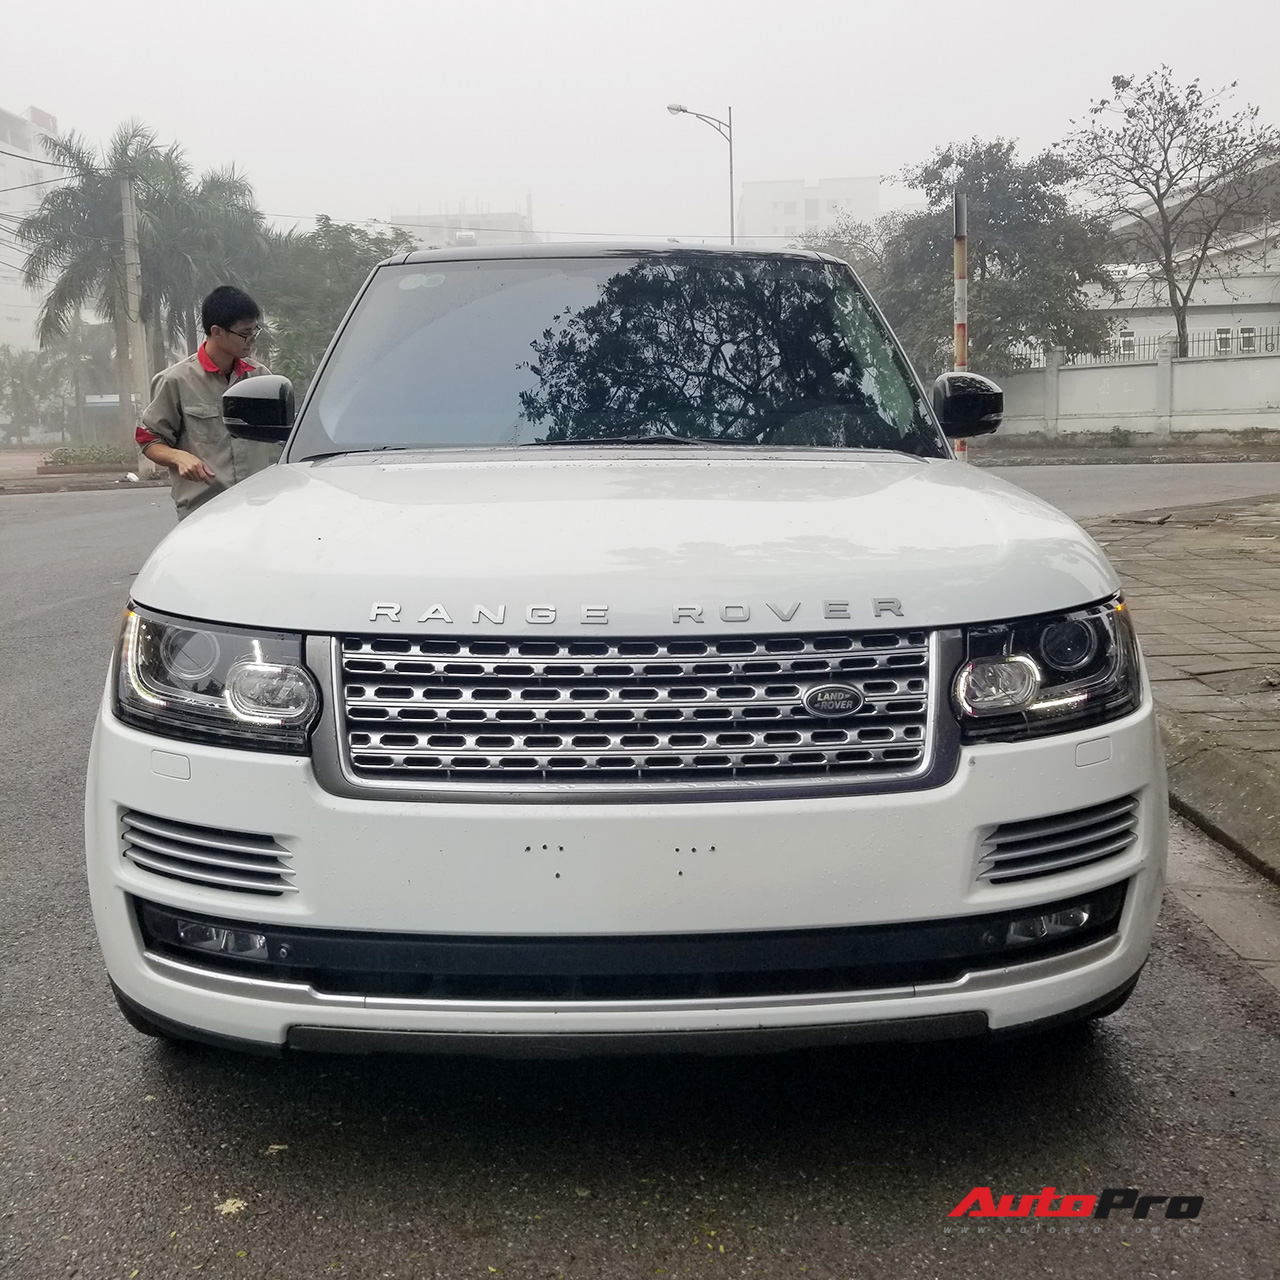 2015 Land Rover Range Rover Review Ratings Specs Prices and Photos   The Car Connection